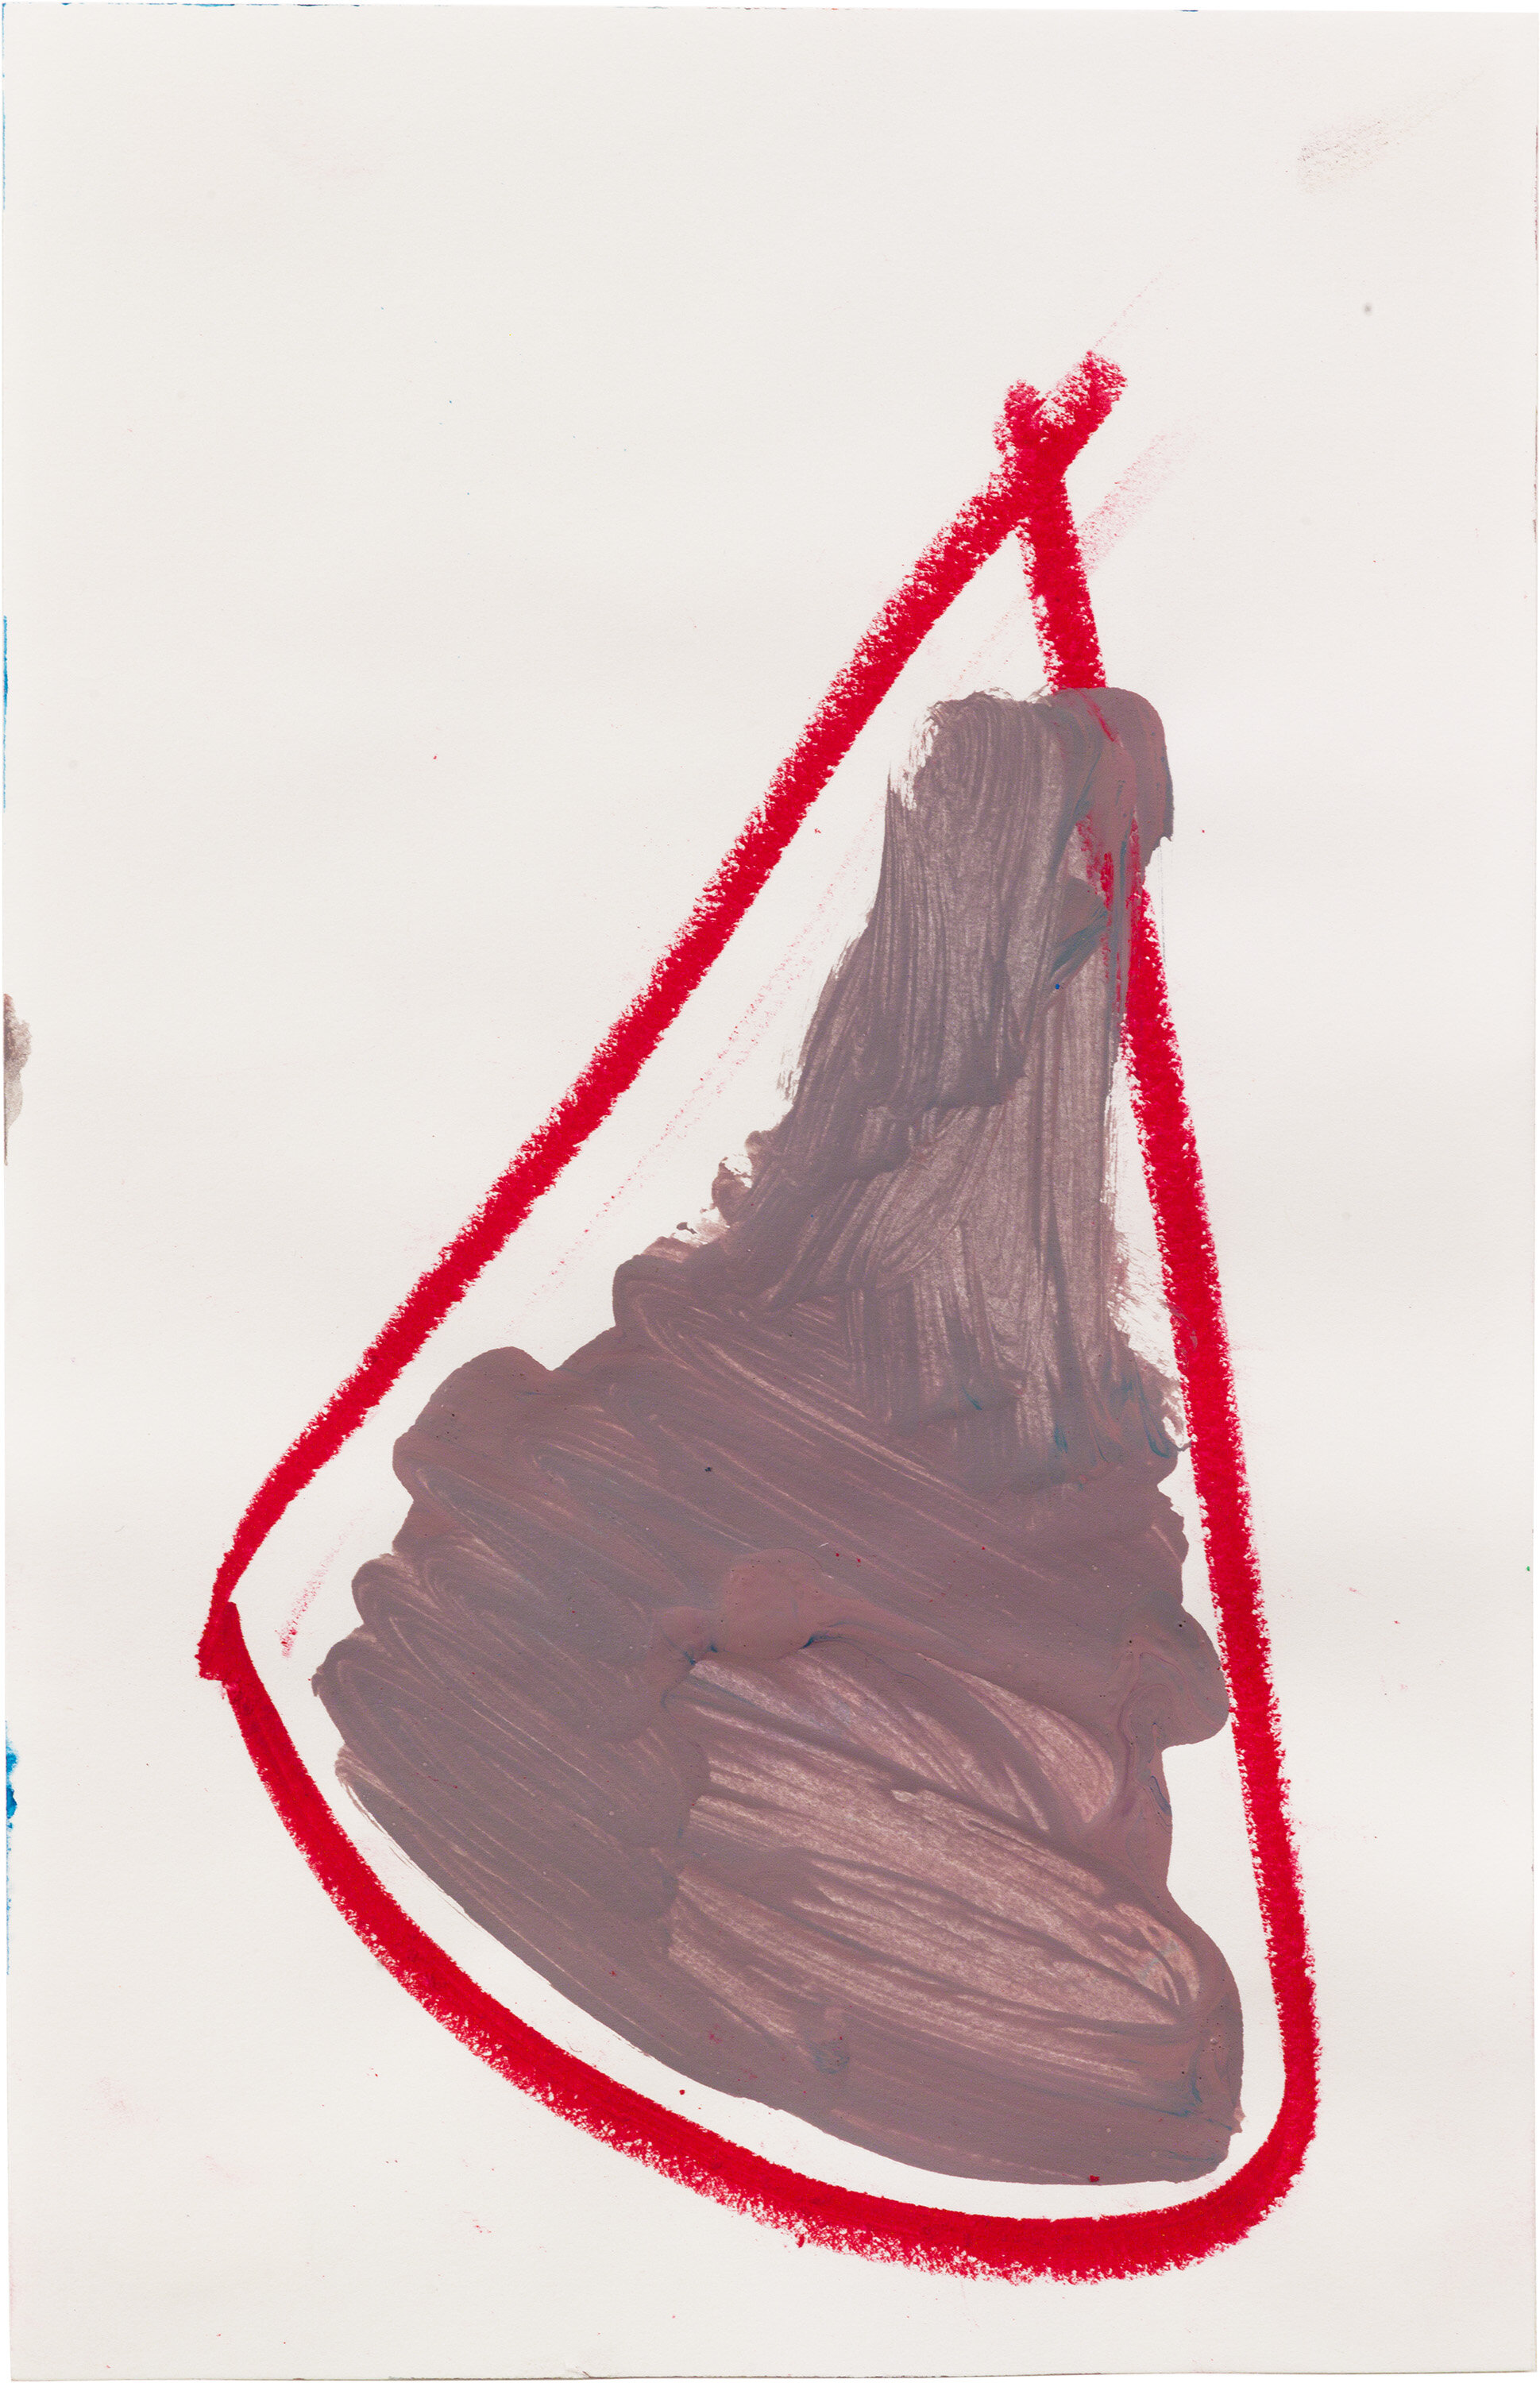  Drew Beattie and Ben Shepard   DBBS-DRW-2013-033   2013  acrylic and oil stick on paper  8.5 x 5.5 inches 